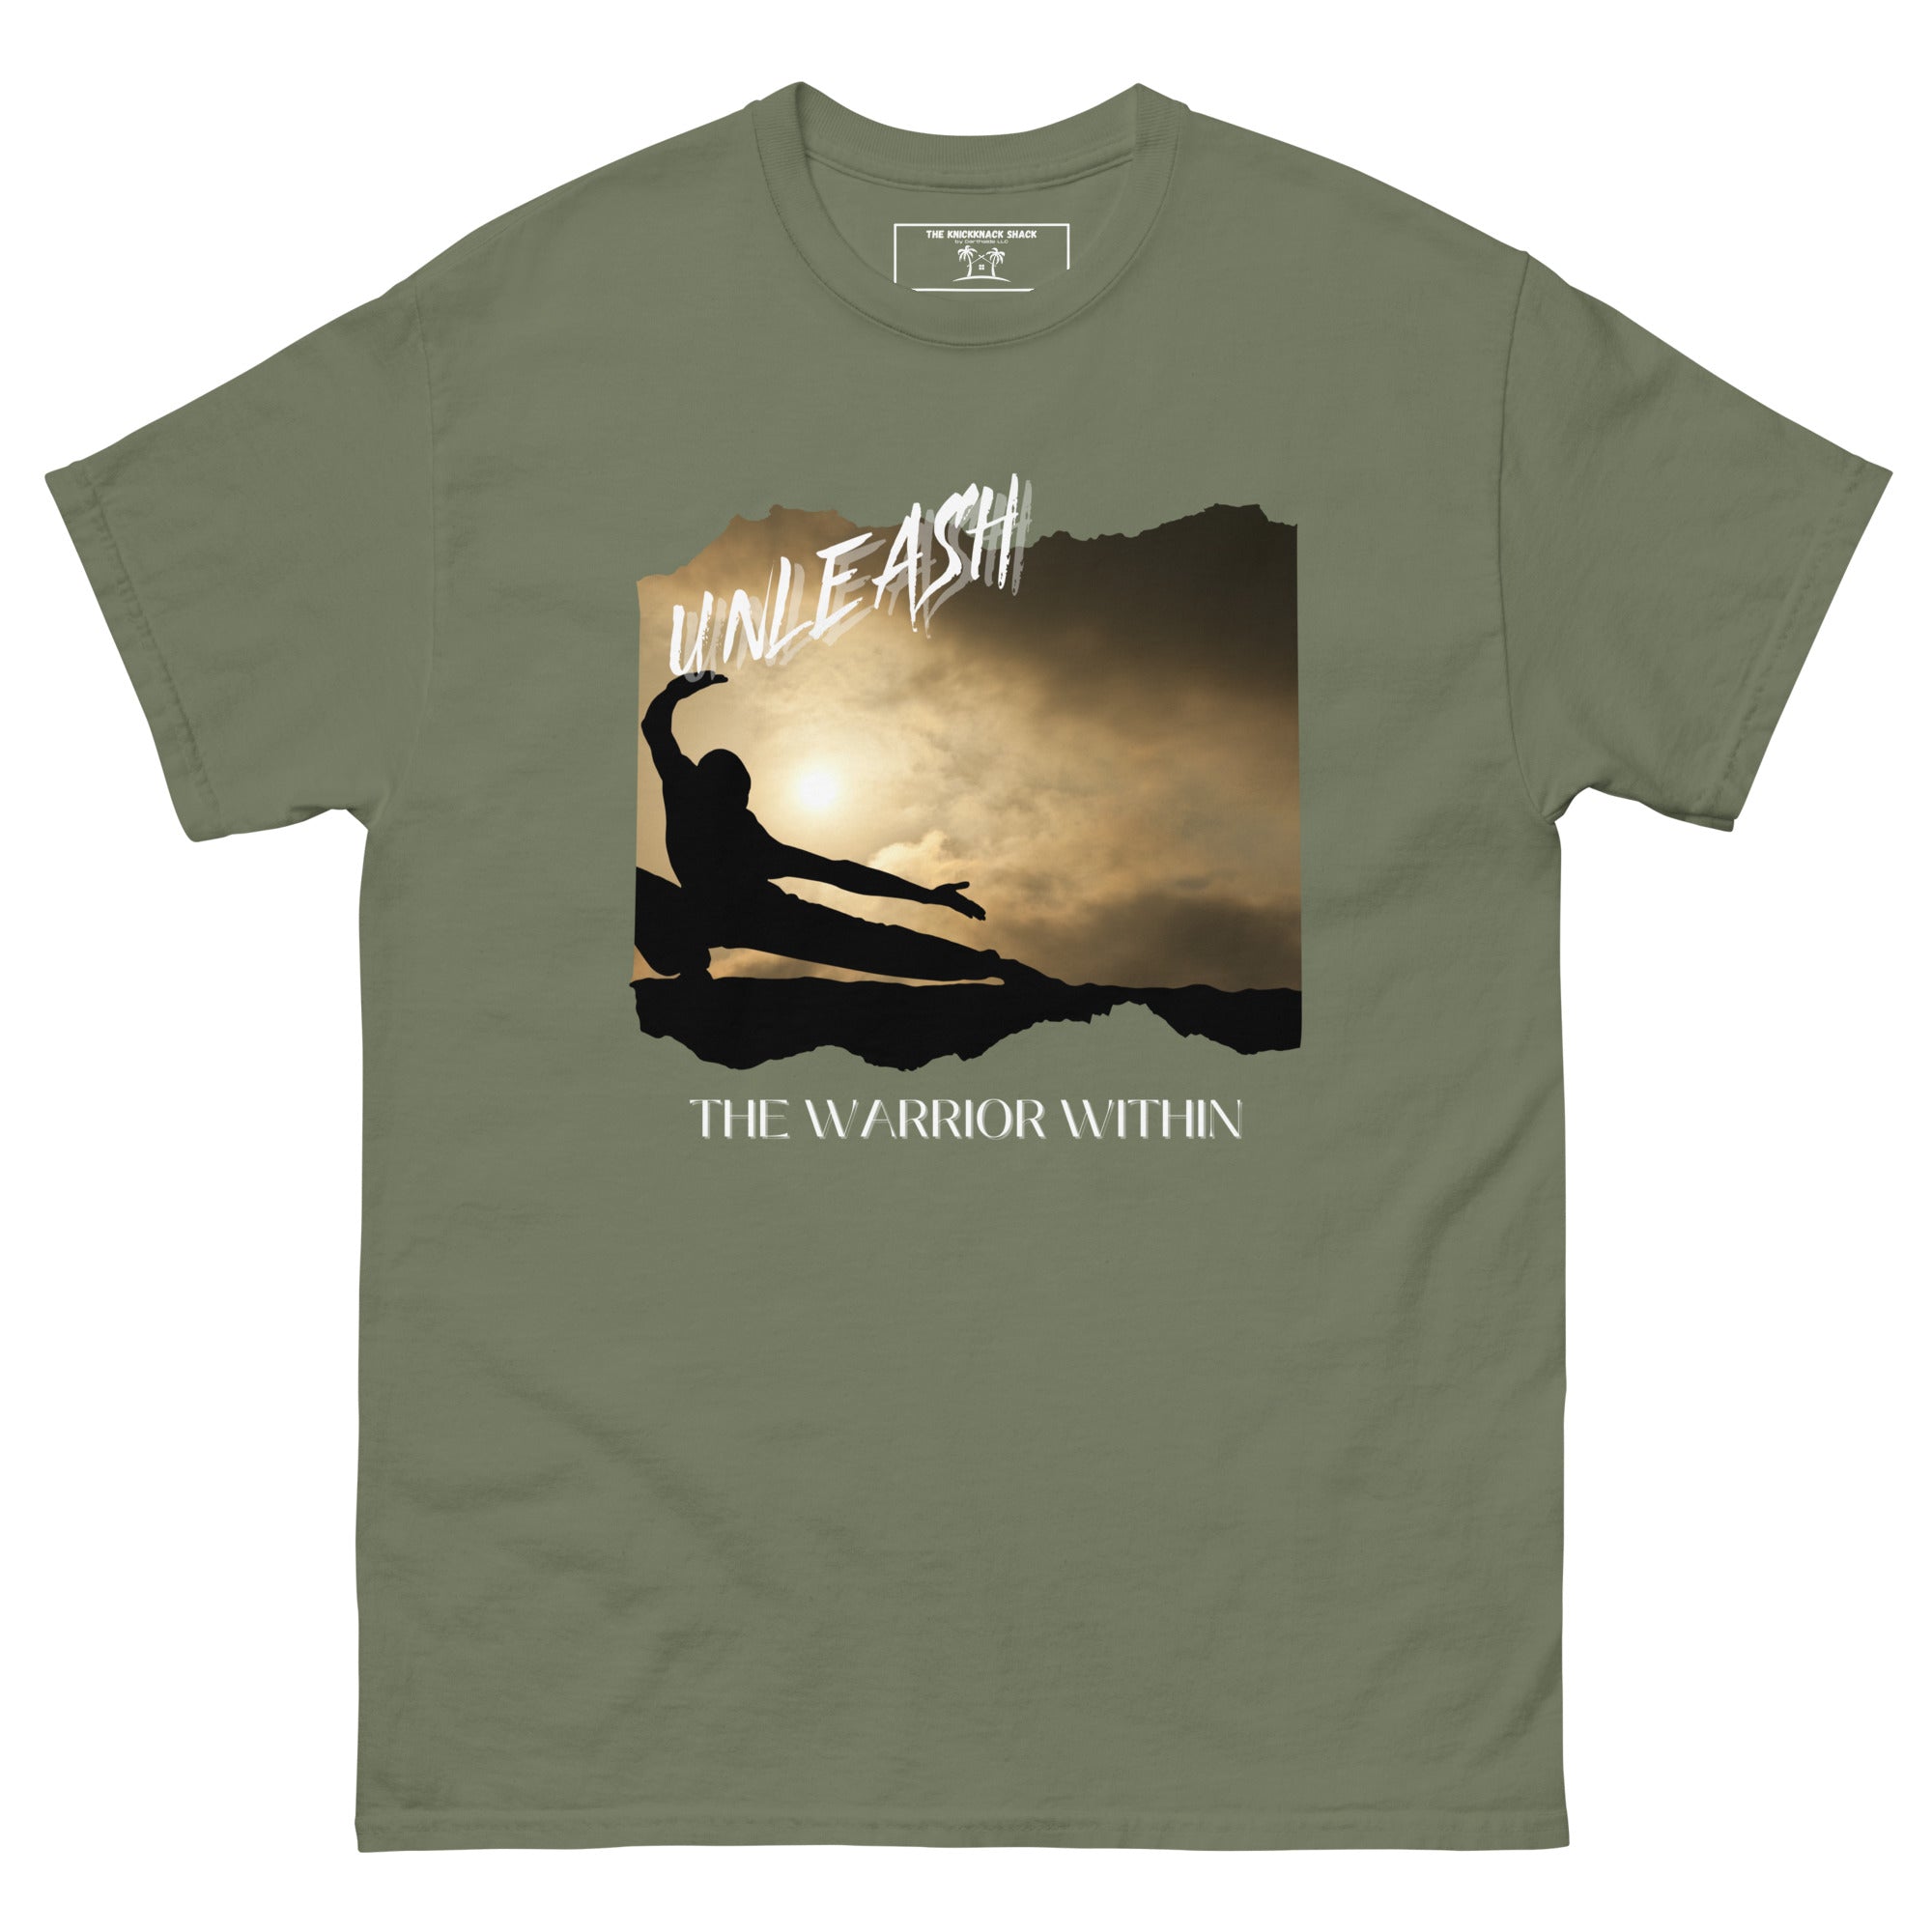 Classic Tee - Warrior Within 4 (Dark Colors)